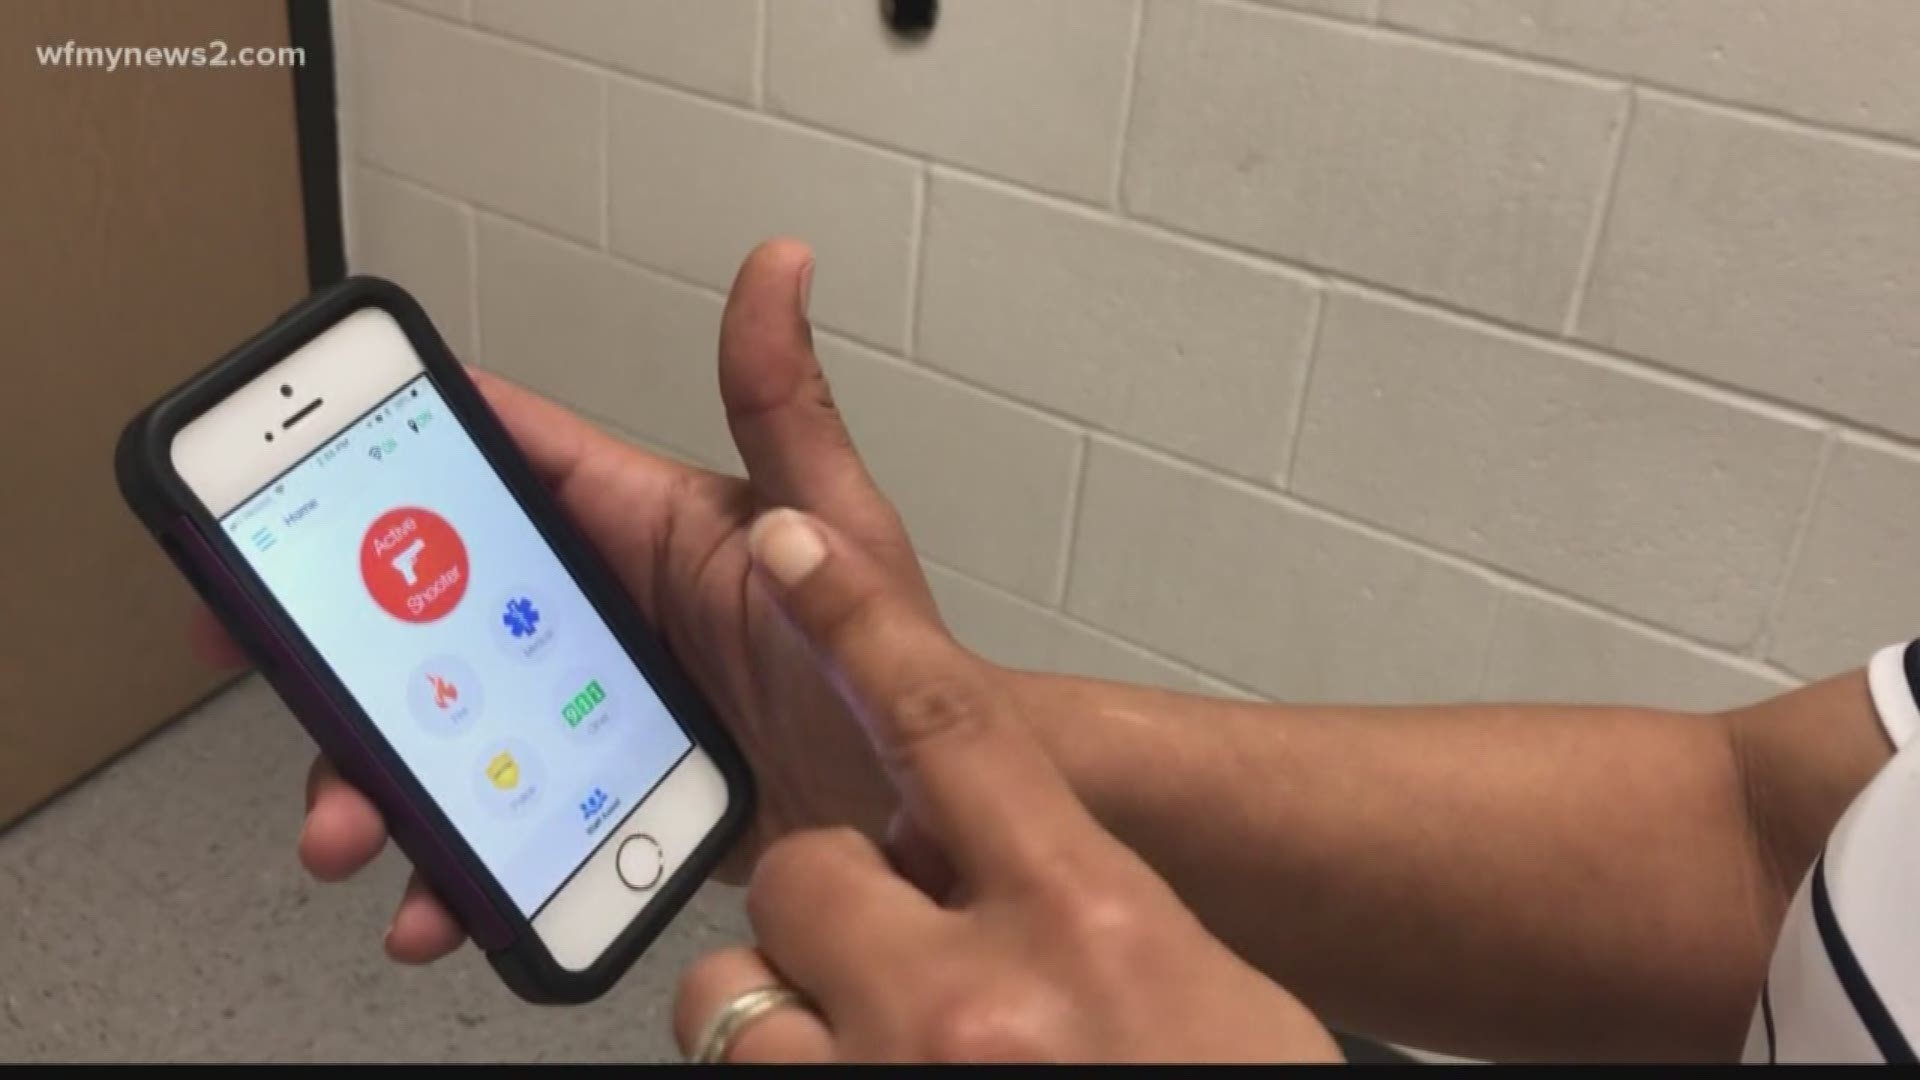 NC School District Experimenting With "Panic Button" App